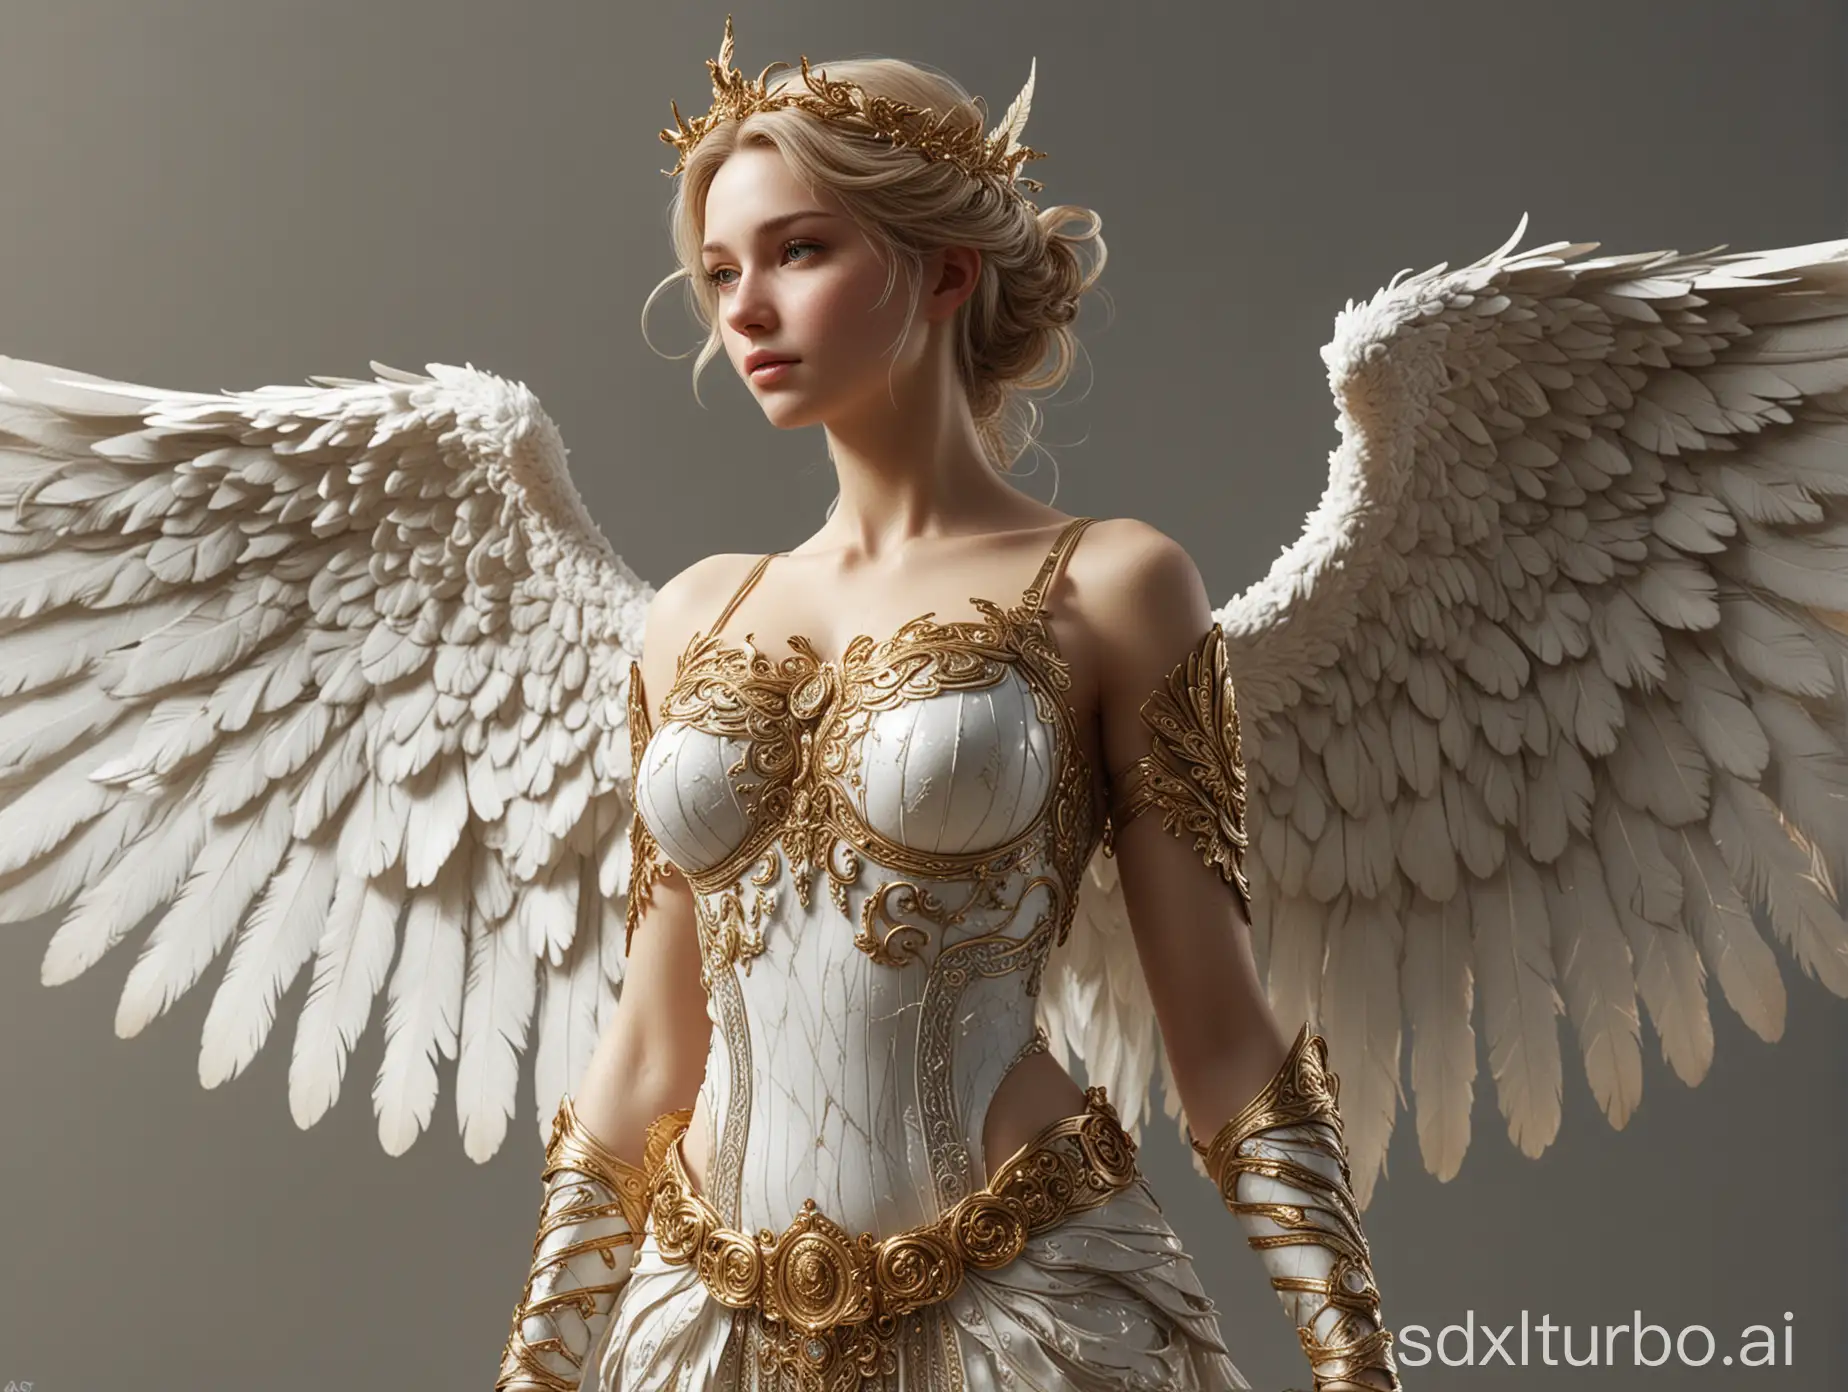 full body & RAW Photo of  of a realistic magnificent detailed angel with wings from 10meter disnace, wings outstretched with gold tips on feathers, intricate ornate marble and bone interwoven and spiraling patterns, final fantasy style,super beautiful godes wearing translucent  great at both photos and artistic feathered 8k, high resolution, detailed, realistic lighting, focus on hands/face, painterly, strong composition, award-winning with simple solid light background